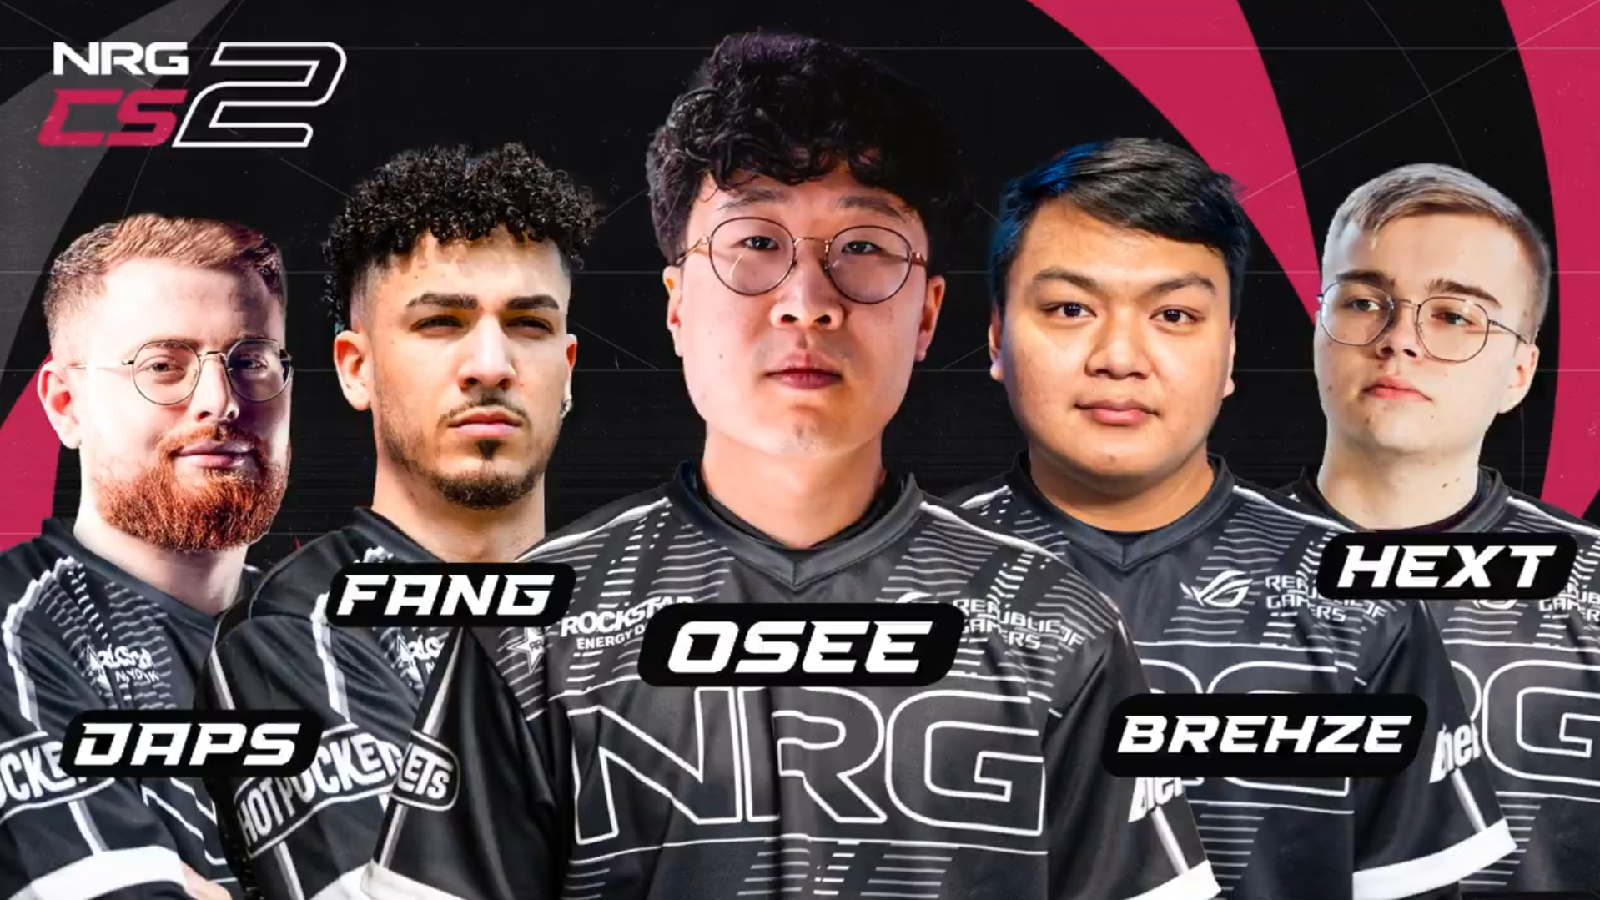 NRG Esports returns to Counter-Strike after 4 years with new NA CS2 roster